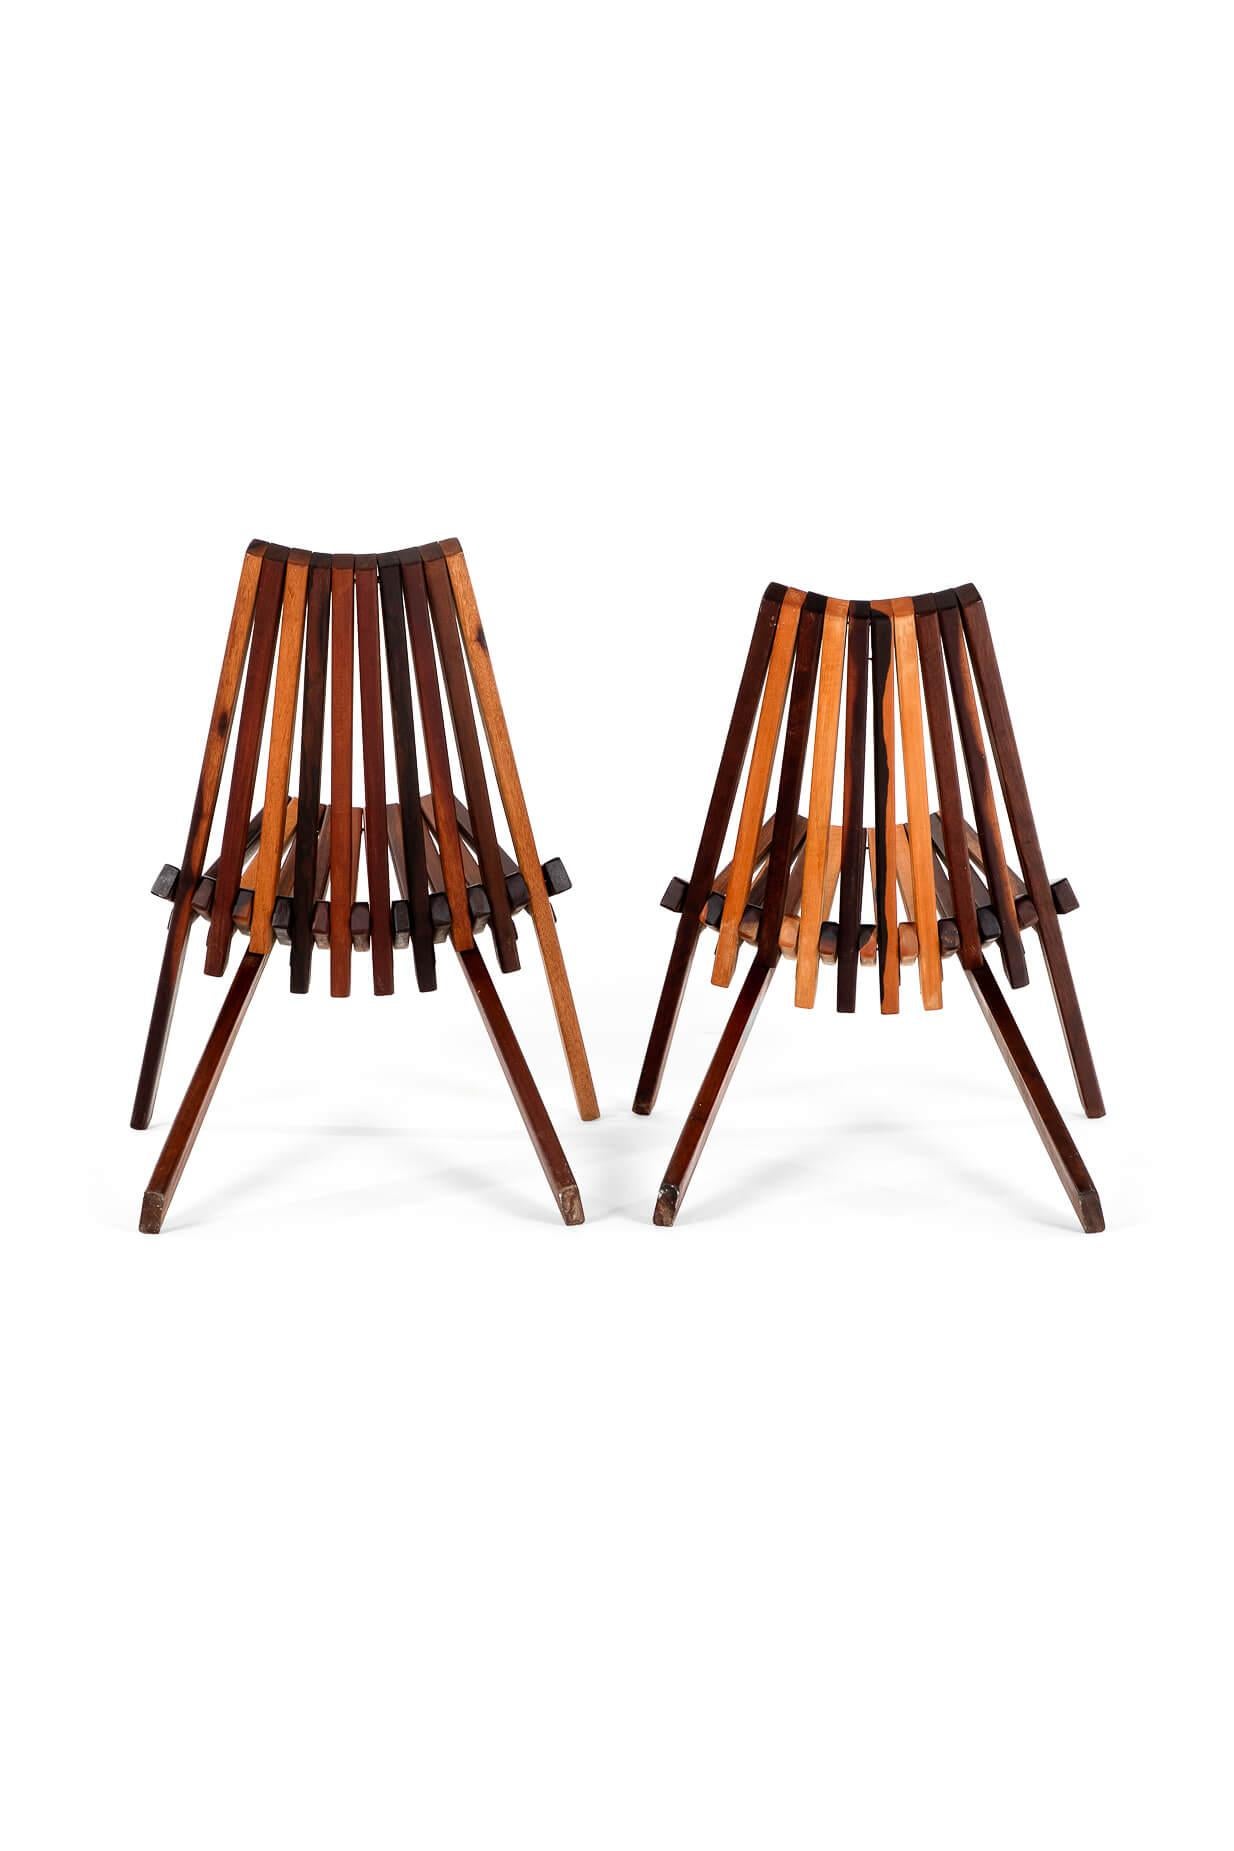 Pair of Scandinavian Folding Teak Chairs In Good Condition For Sale In Faversham, GB